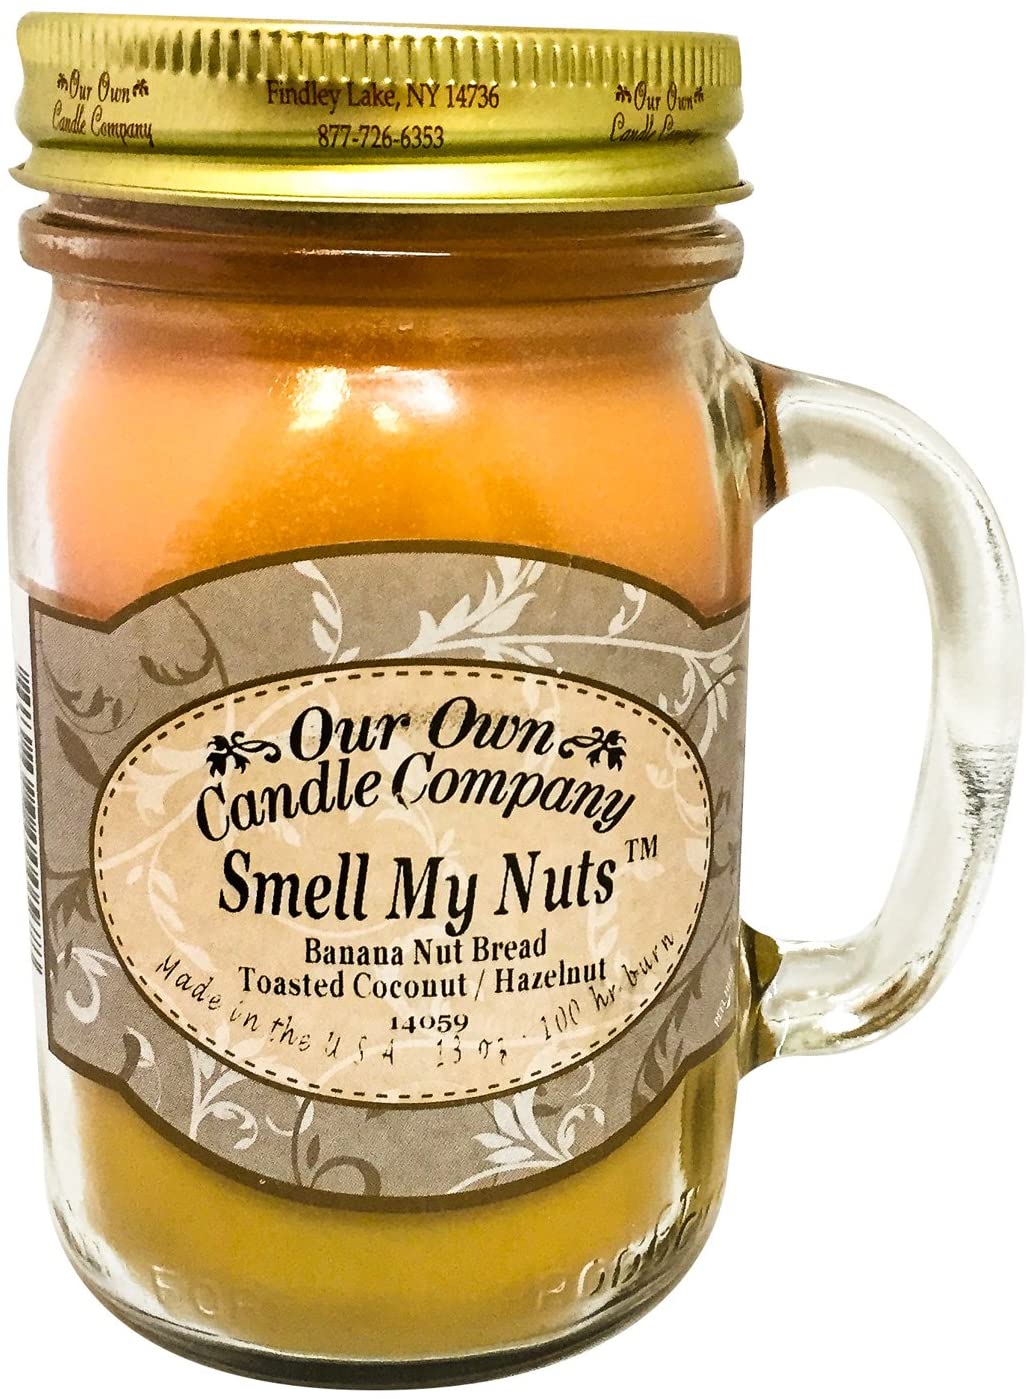 Our Own Candle Company Smell My Nuts Lead-Free Scented Candle